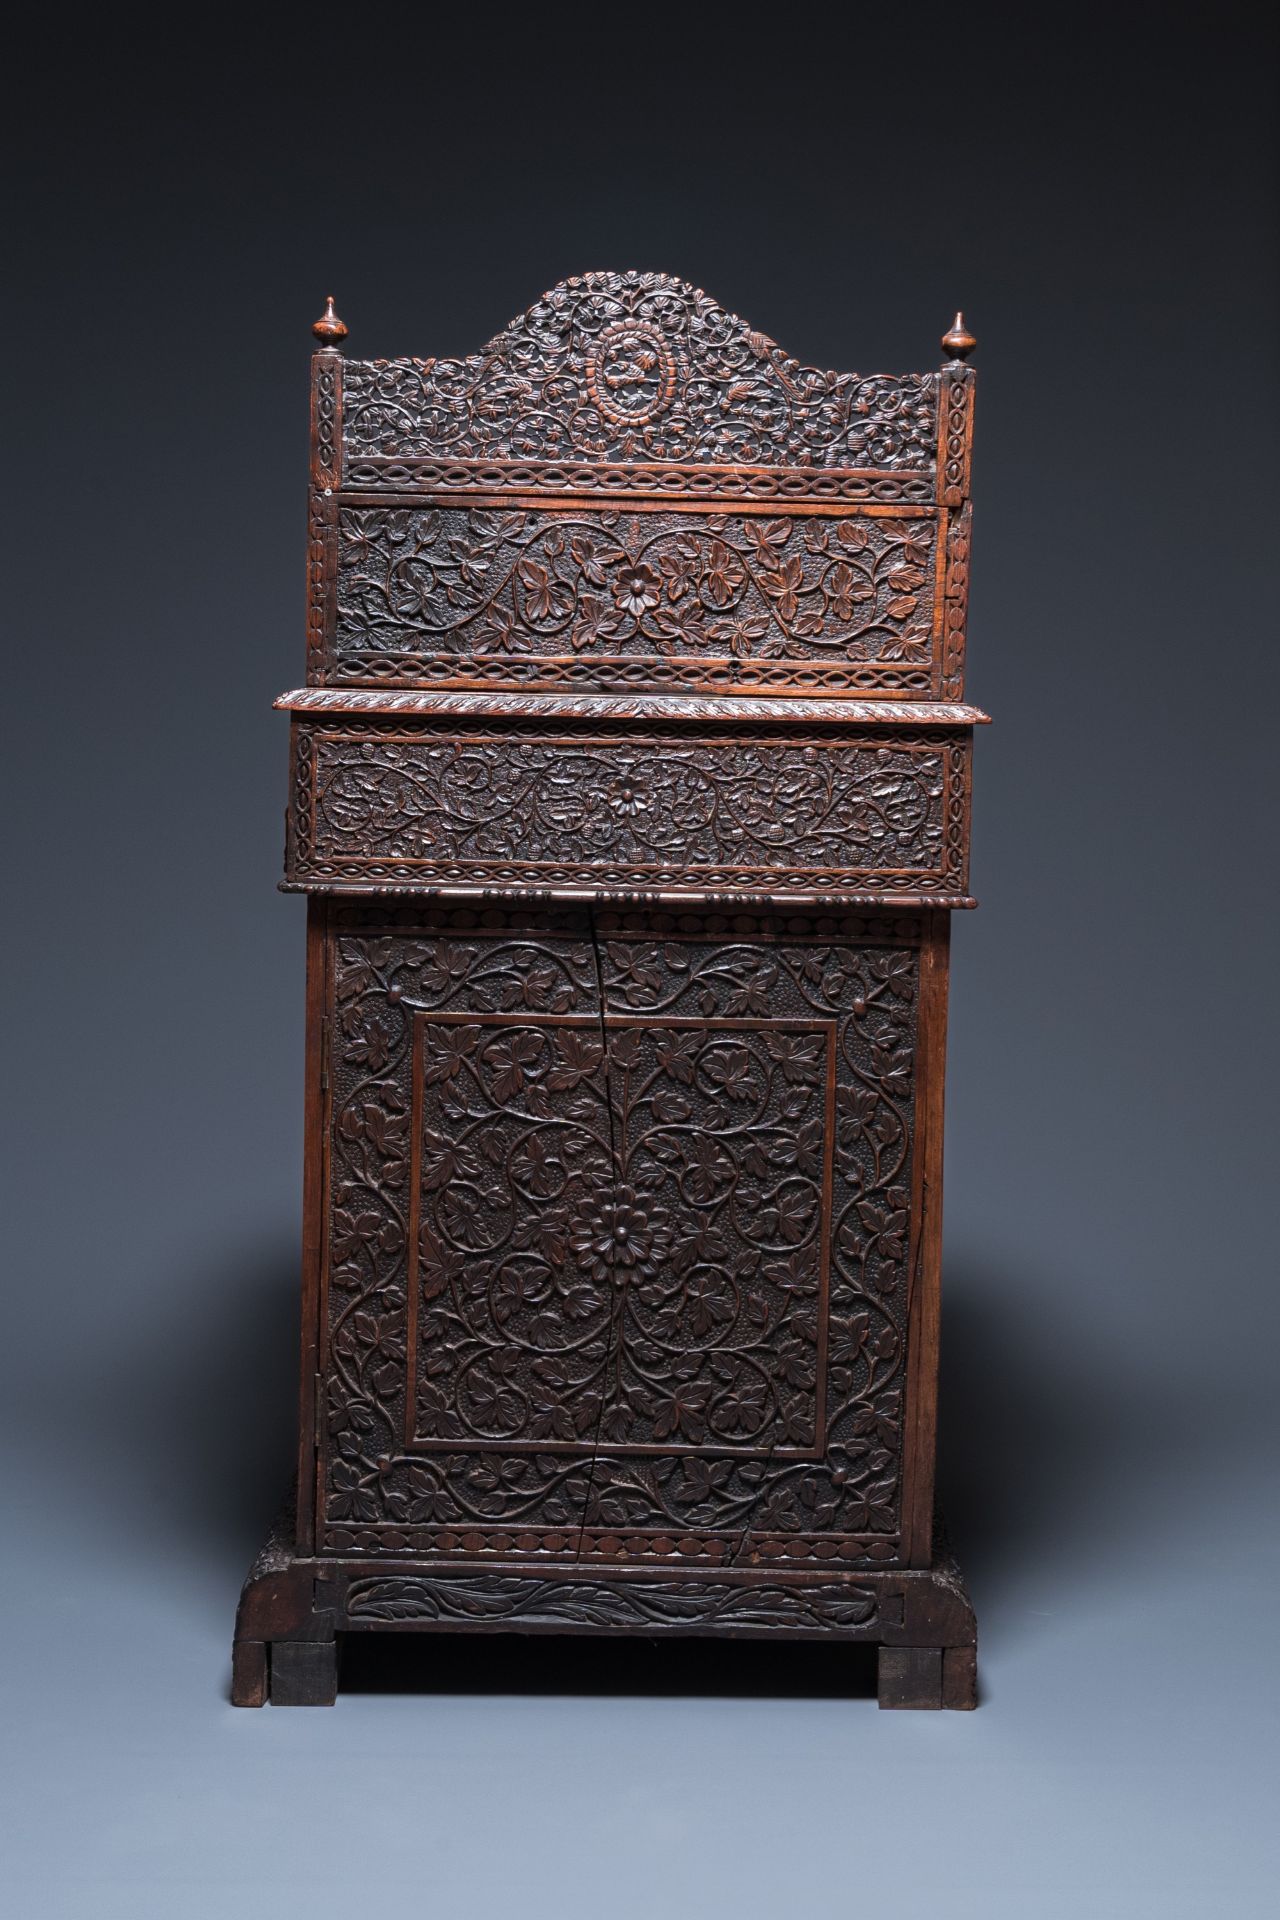 A colonial Anglo-Indian reticulated wooden desk with hidden compartment, 19th C. - Image 7 of 24